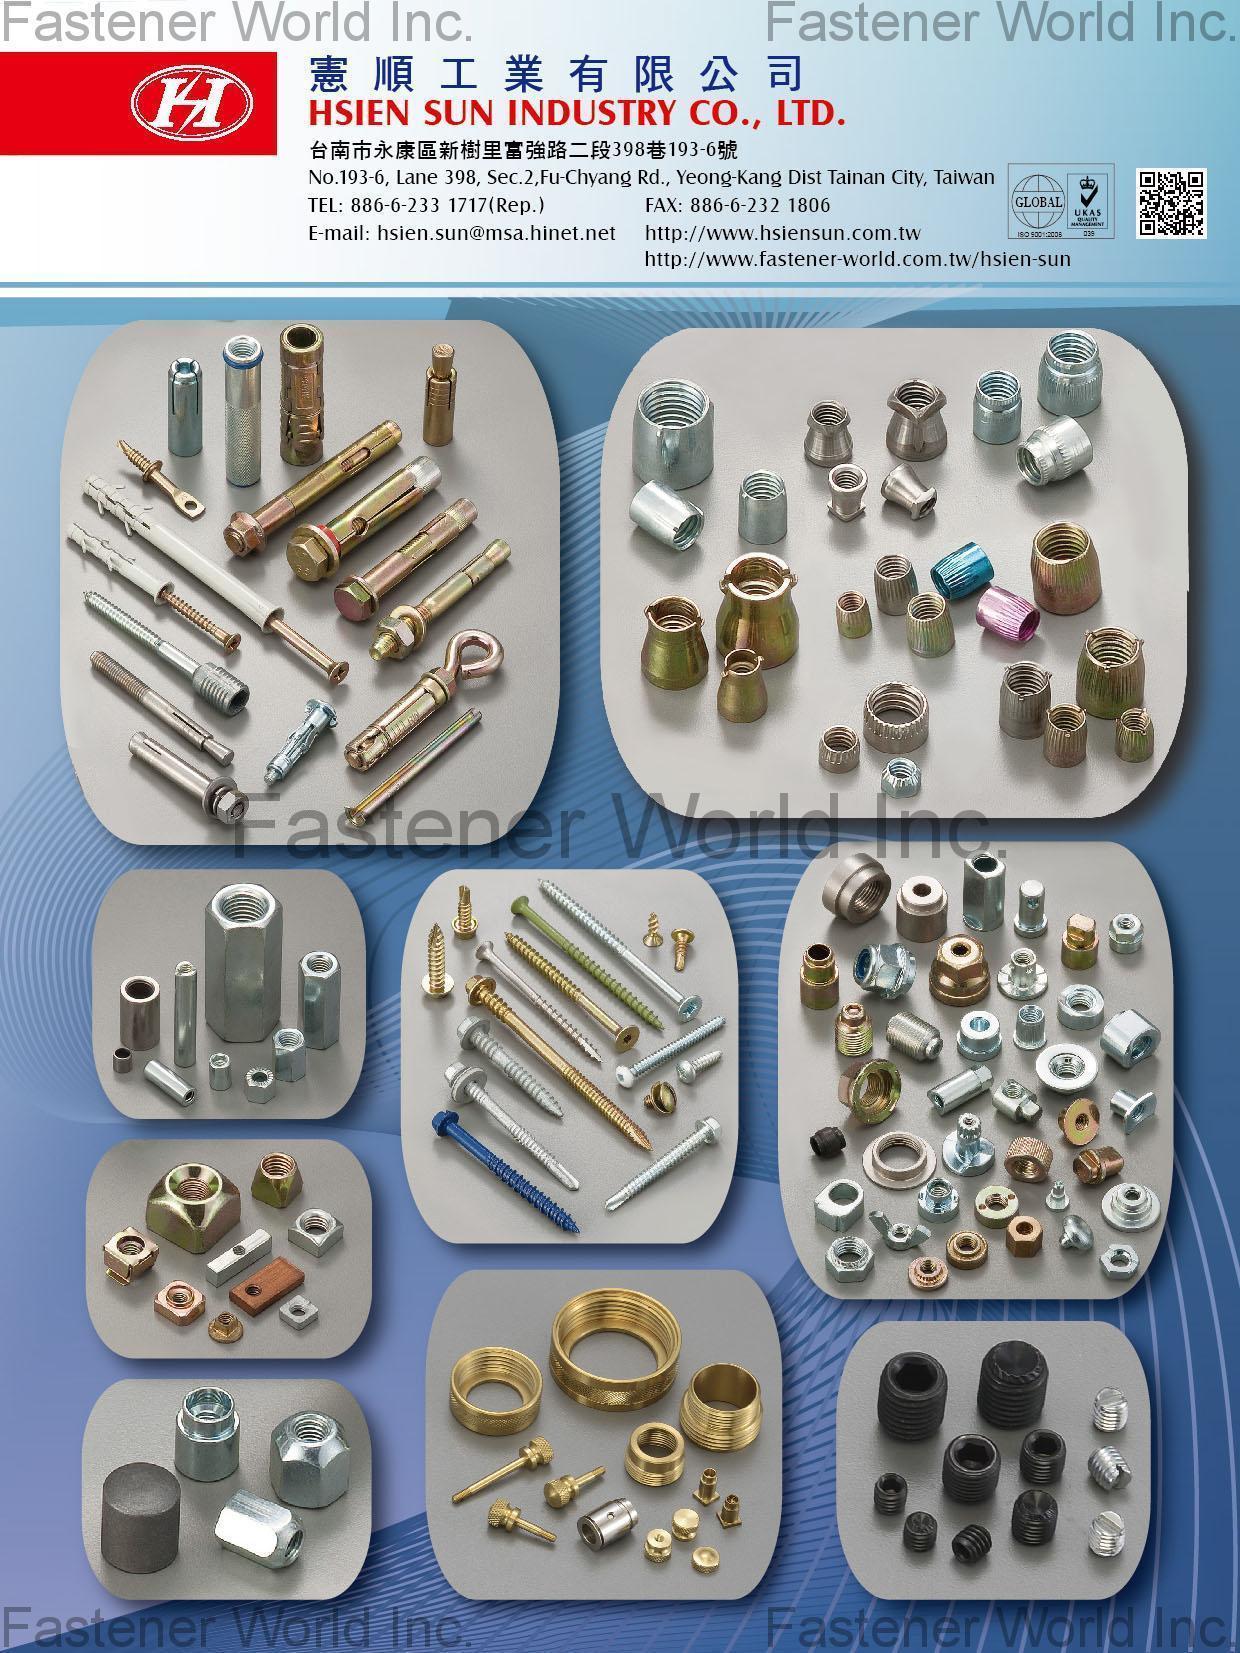 HSIEN SUN INDUSTRY CO., LTD.  , Conical Nuts, Anchor, Concrete Sleeve Anchor, Sleeve Anchor Bolt Type, Sleeve Anchor Flange Type, Heavy Duty Anchor, Zmark Heavy Duty Anchor, Wedge Anchor Nuts, Concrete Wedge Anchor, Nylon Frame Anchor (With Ring), Nylon Nail Anchor With Screw, Special Nuts, Autoparts Nuts, Bicycle Nuts, Cap Nuts, Furniture Nuts, Hex & Round Coupling Nuts, Locking Nuts, Square Nuts, Thread Nuts, T Nuts, Turning Part, Set Screws,Self Drilling Screws, Tapping Screws, Chipboard Screws , All Kinds of Screws